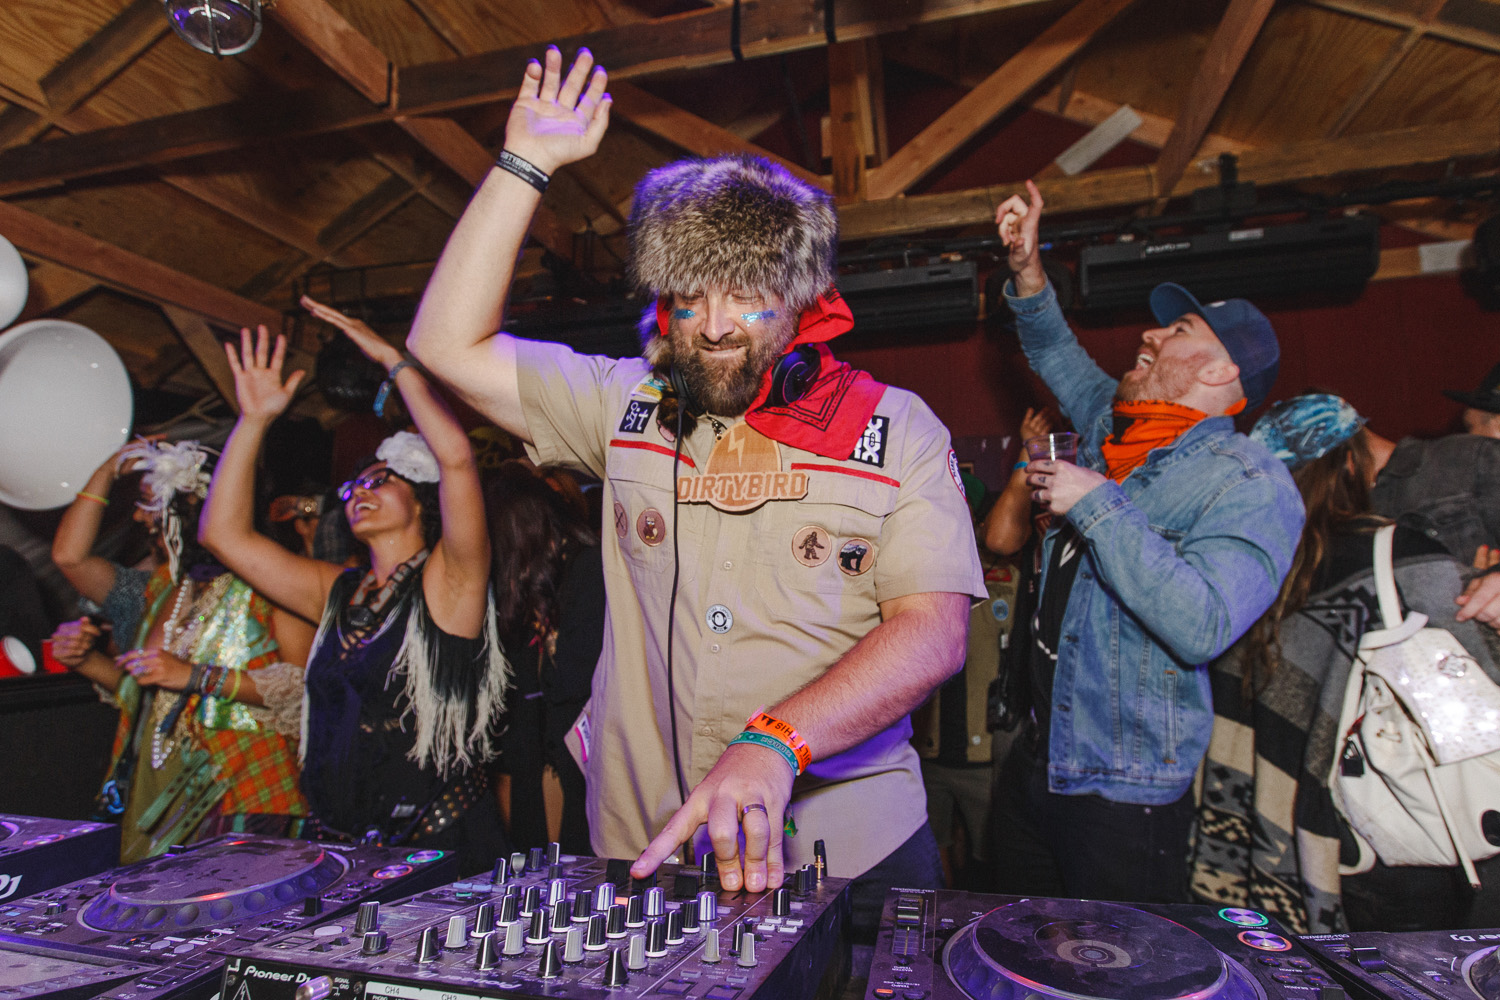 DIRTYBIRD members premiere the Smirnoff Sound Collective documentary at 2nd annual Campout in Silverado, California.